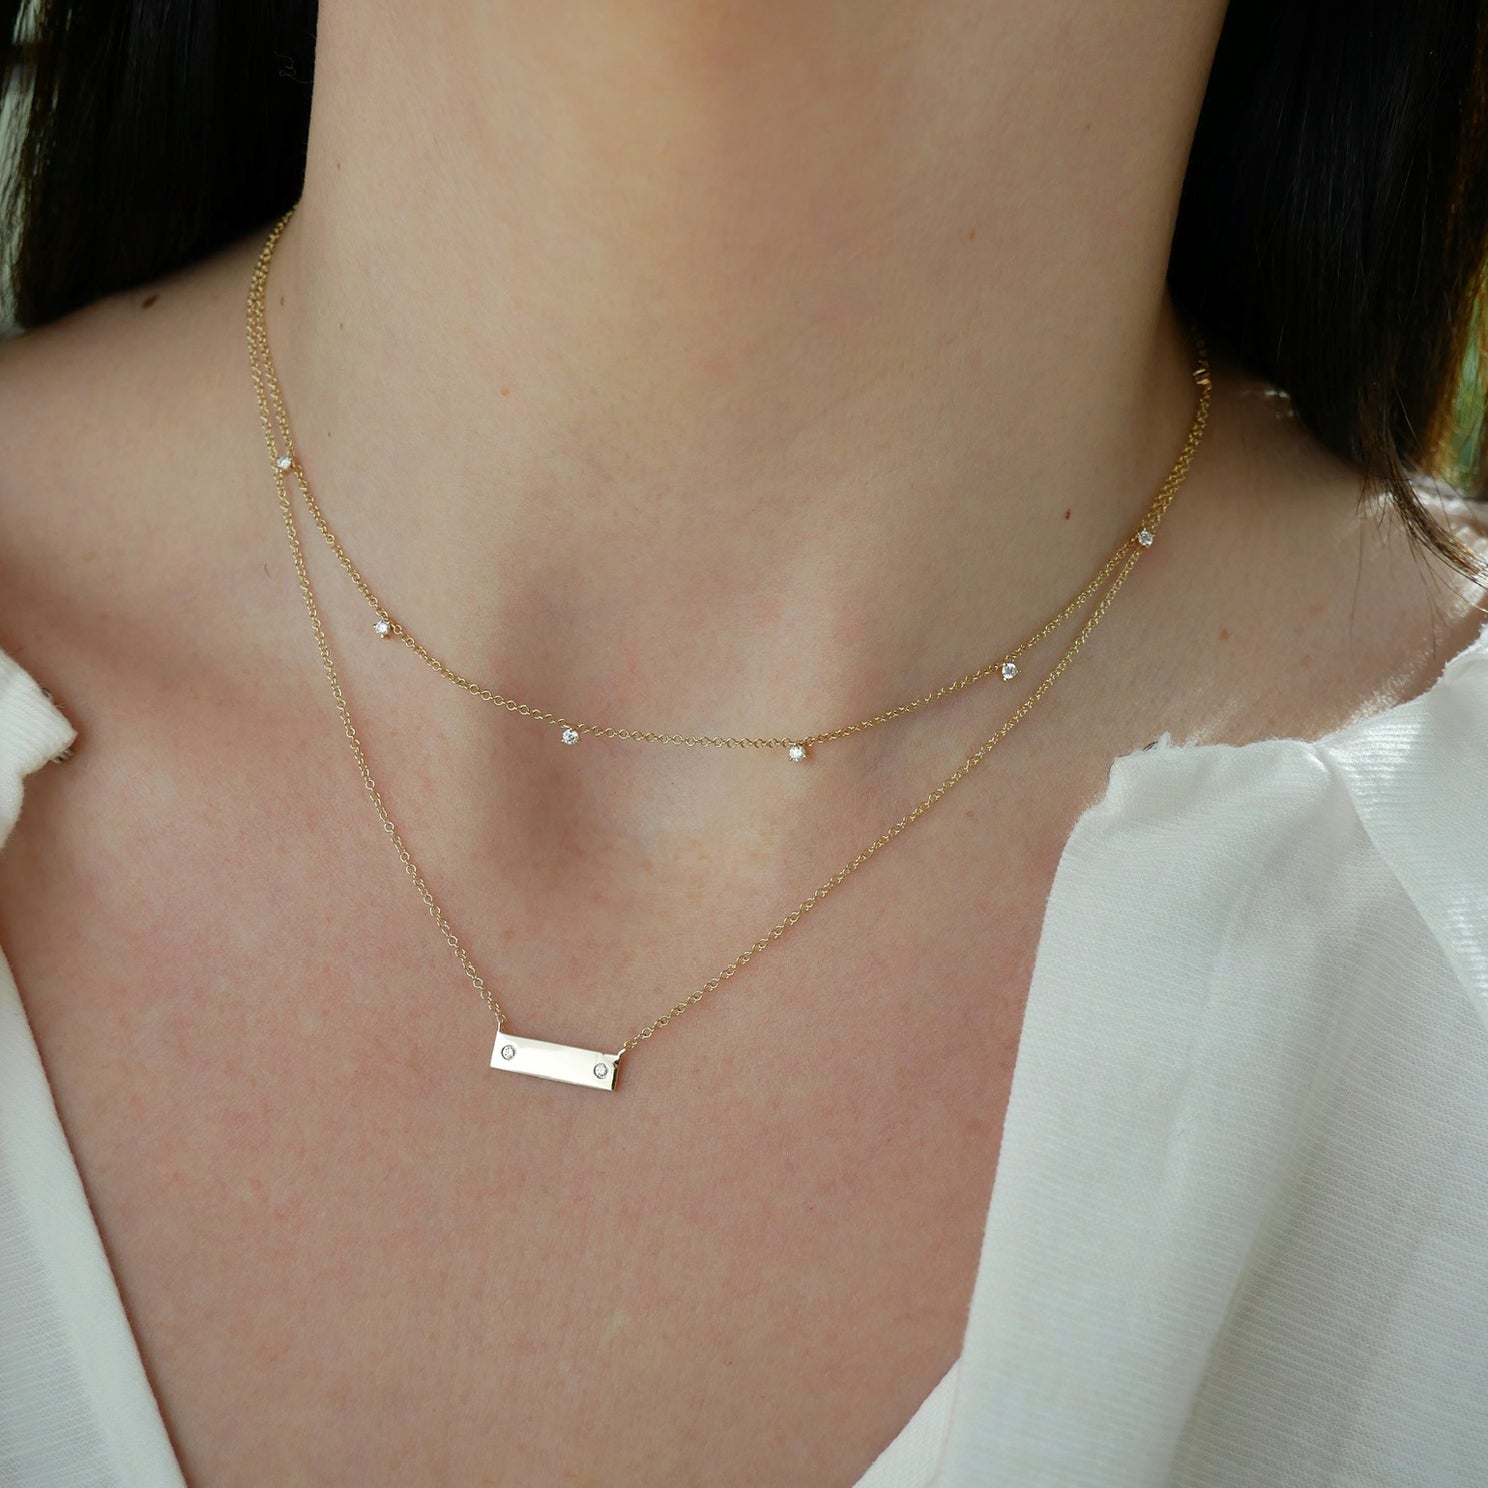 Mini Nameplate Necklace in 14k yellow gold layered with diamond prong set necklace styled on neck of model wearing white blouse